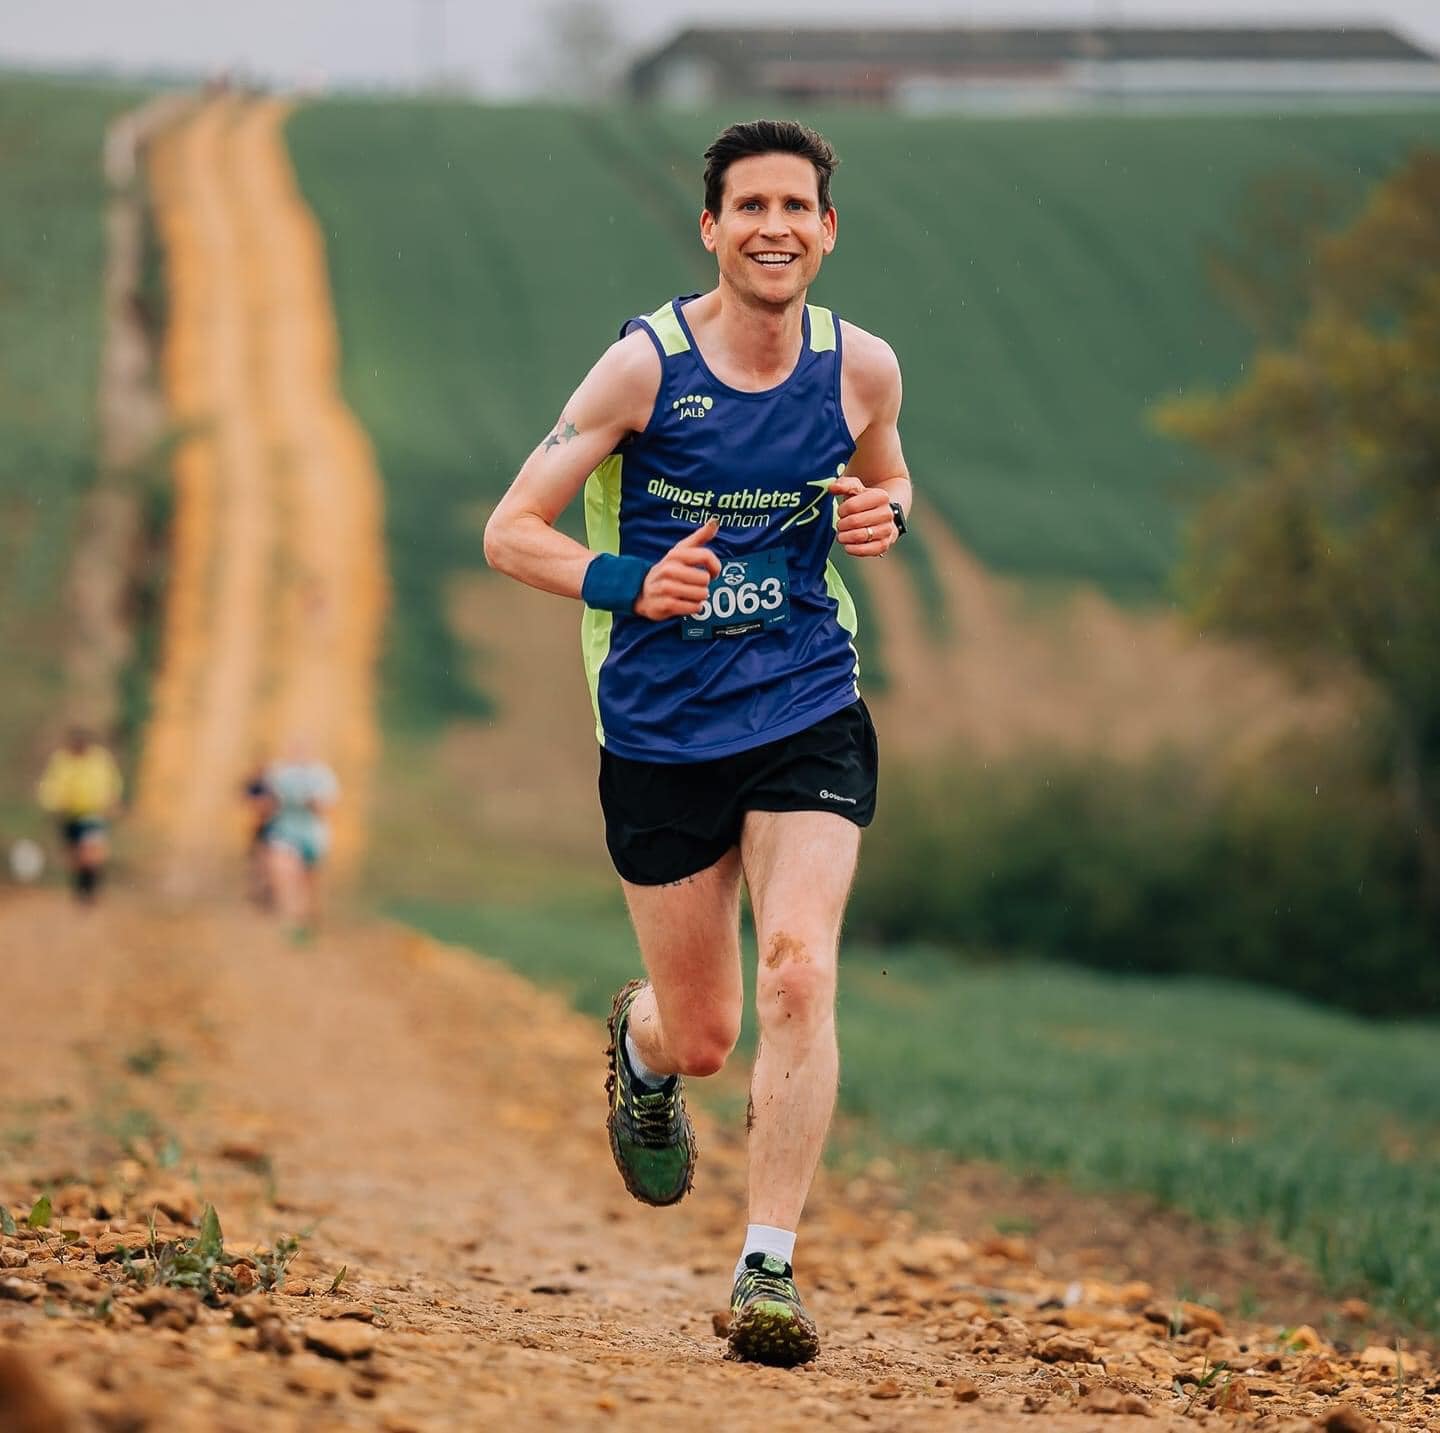 Mike Johnston - Runner of the Month, March 2022